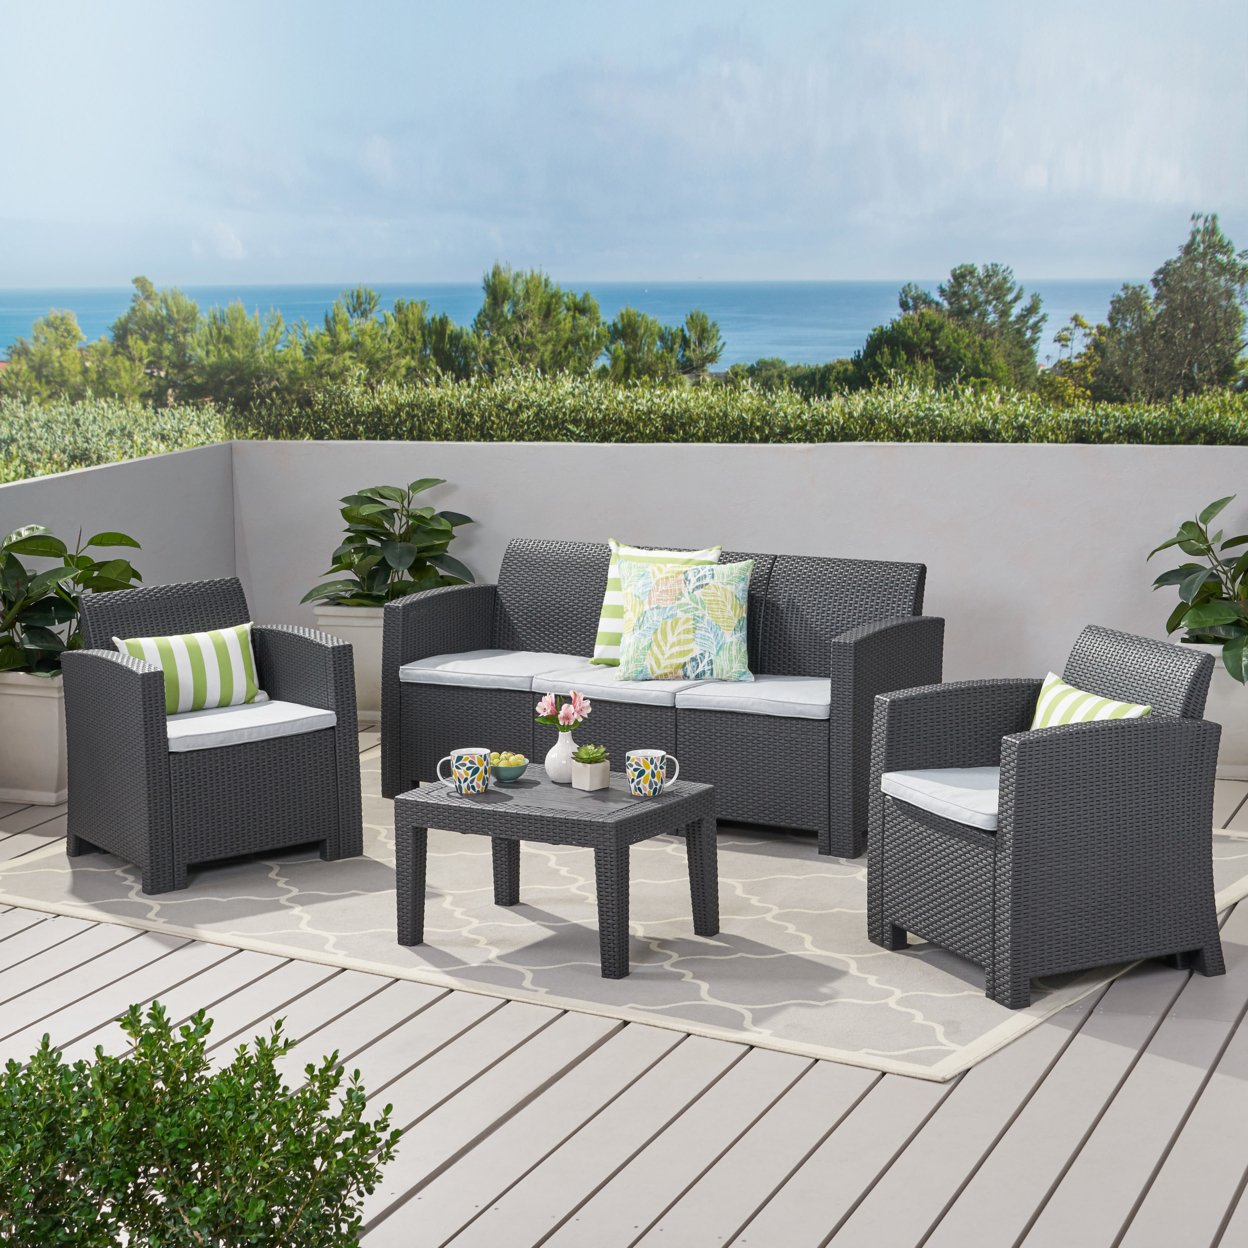 Jacob Outdoor 4 Piece Charcoal Faux Wicker Rattan Style Chat Set - Charcoal, Light Gray